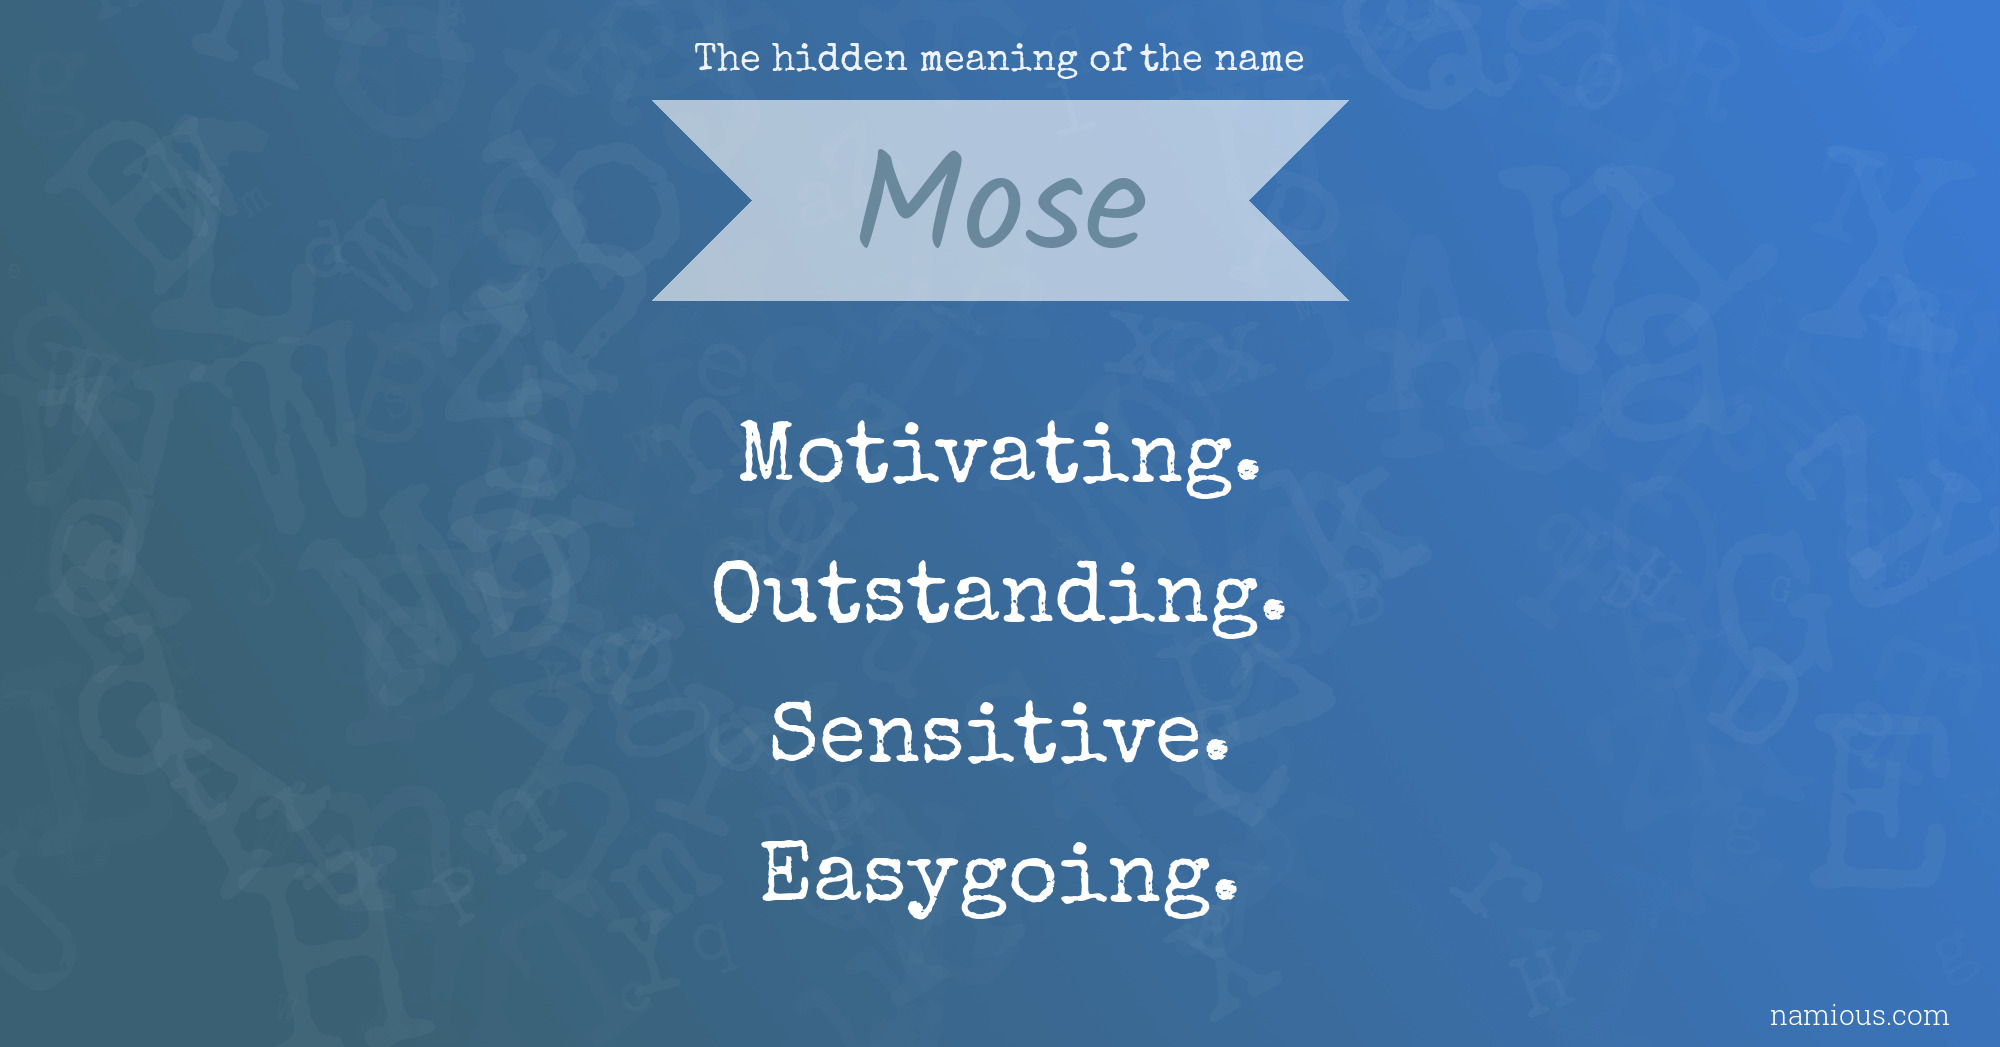 The hidden meaning of the name Mose